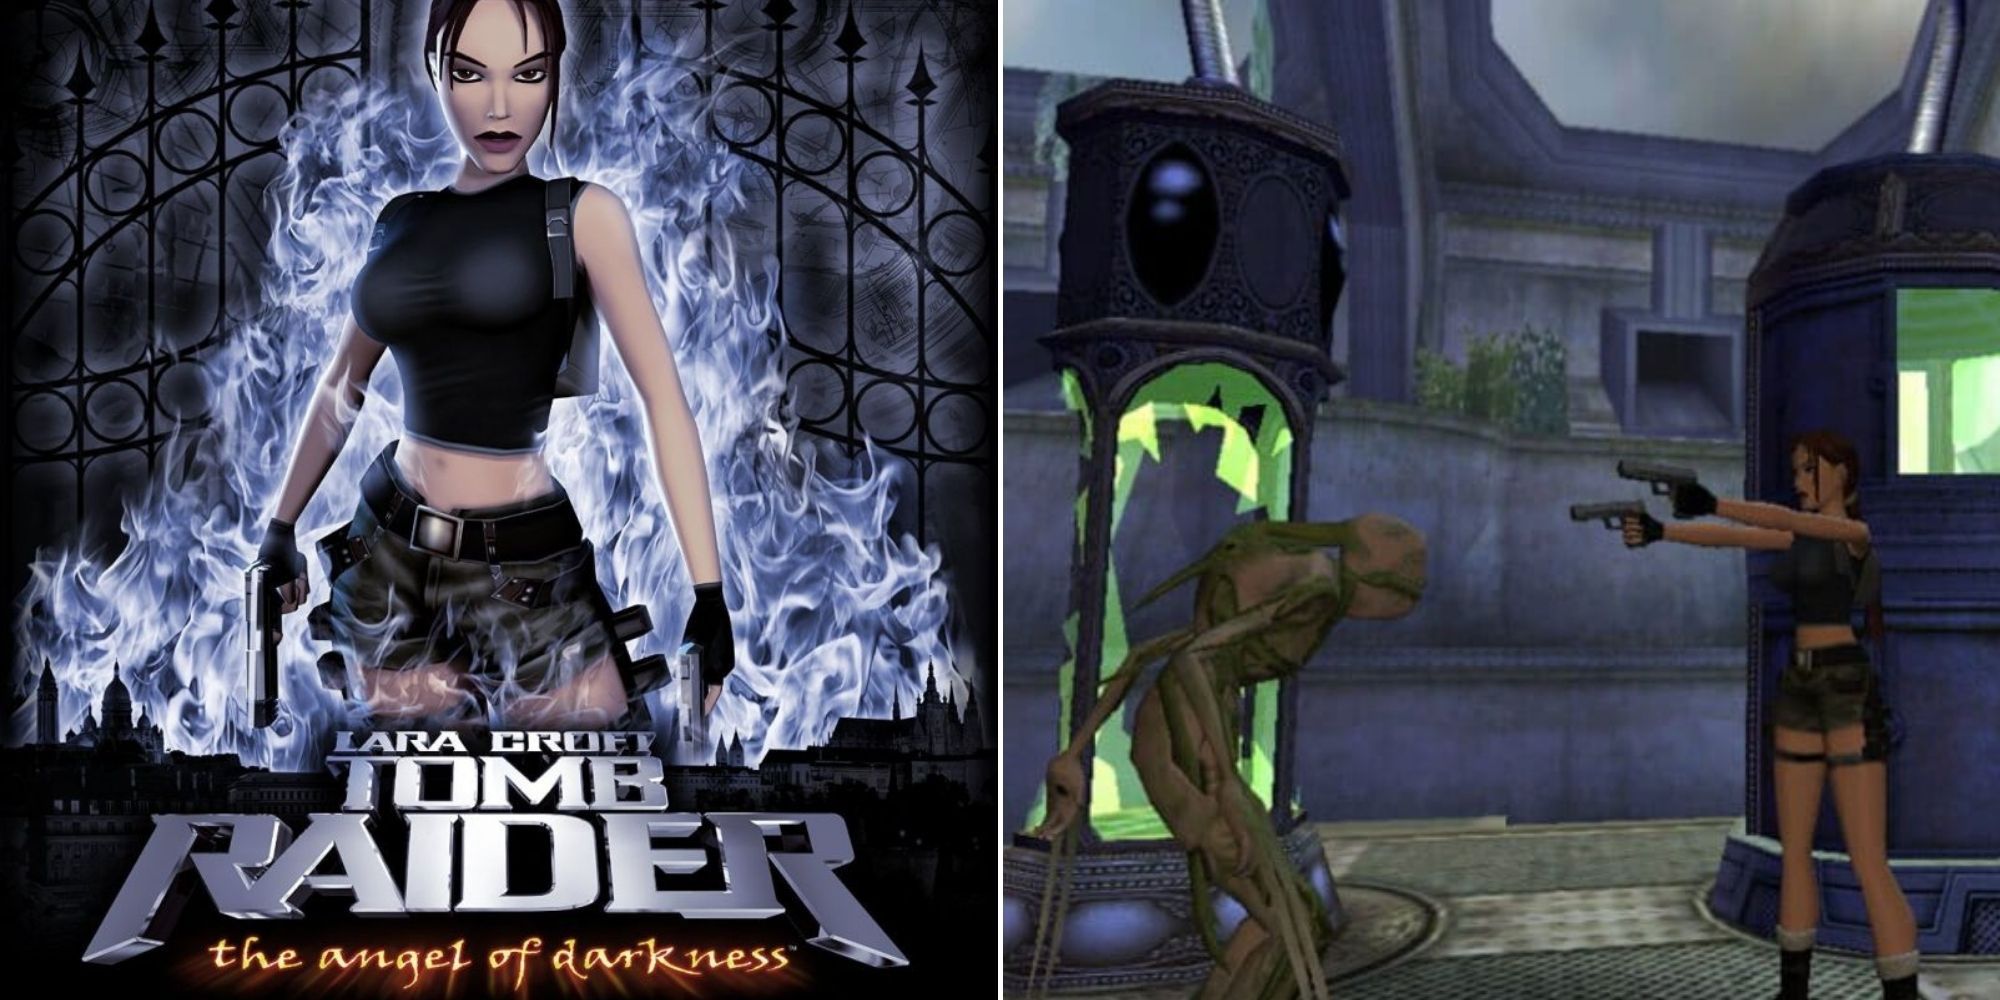 Tomb Raider: The Angel Of Darkness Cover Art and Lara fighting a monster breaking out of a chamber